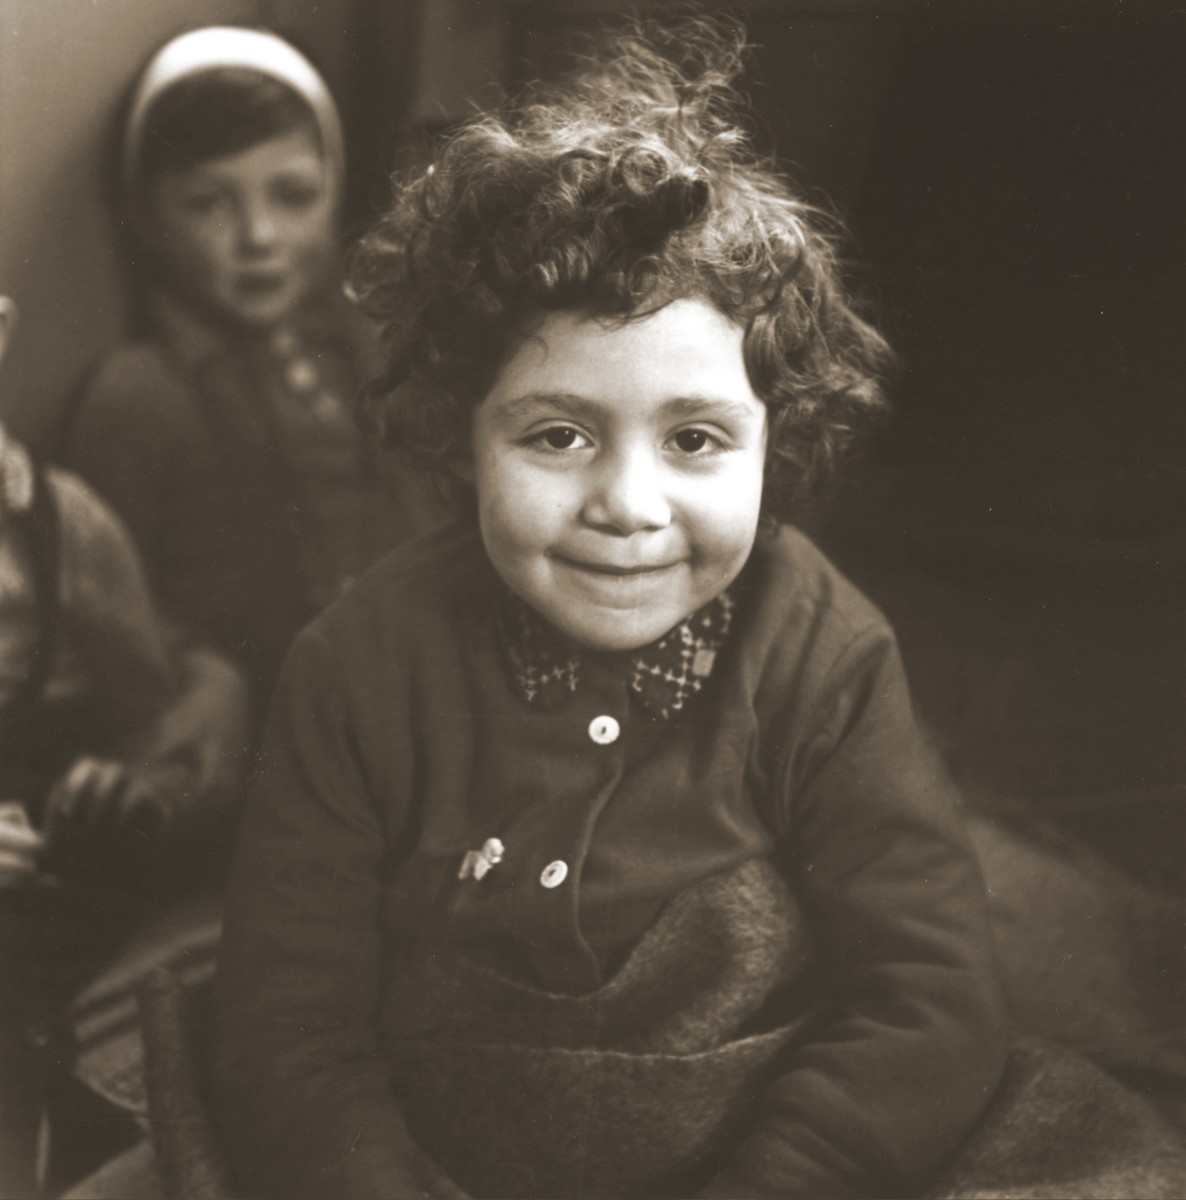 Portrait of a young Jewish child in the Hadwigschulhaus in St. Gallen.